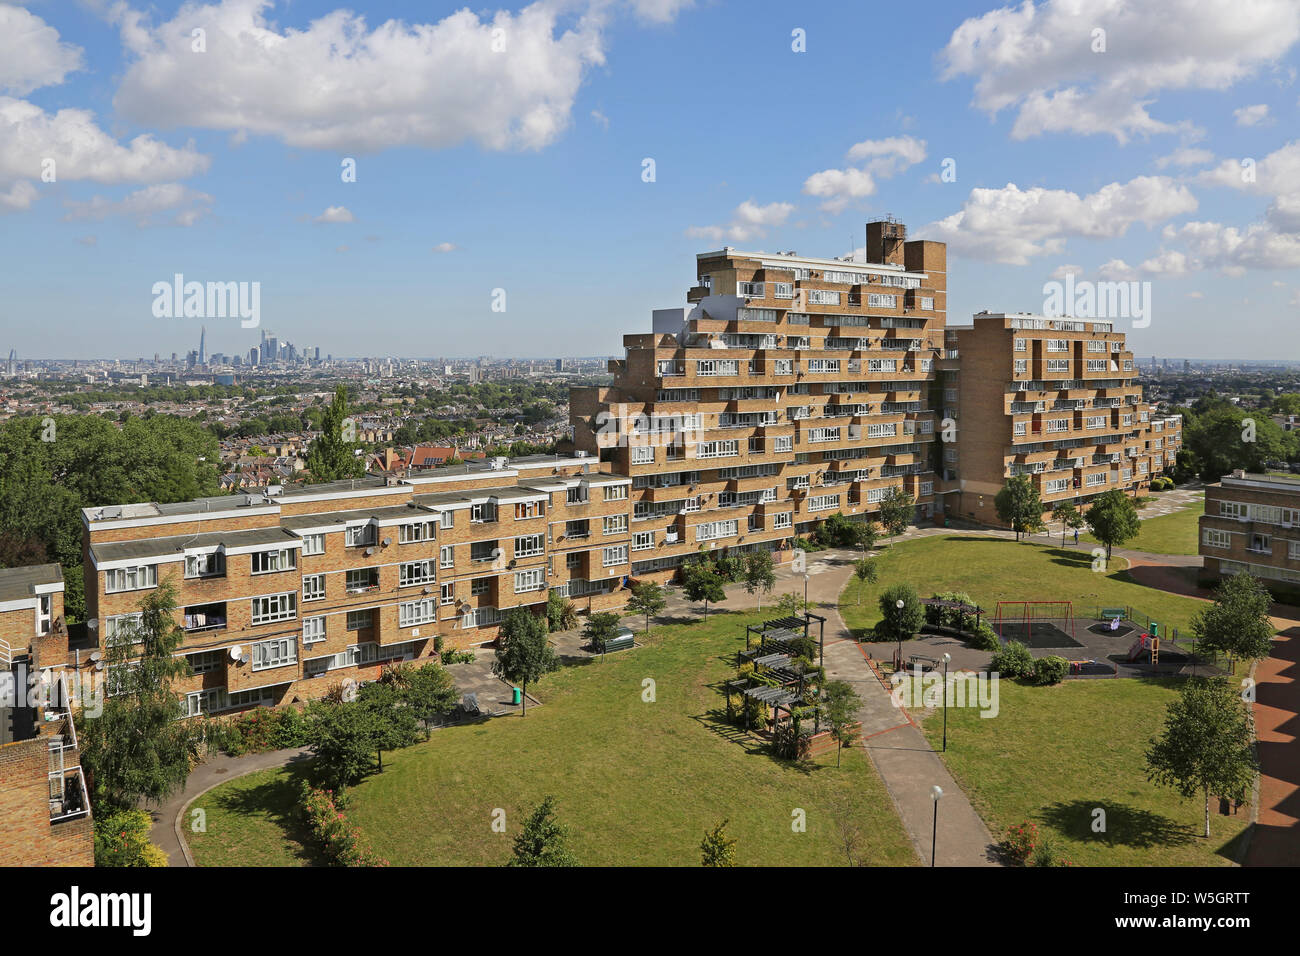 High level view of Dawson's Heights, the famous 1960s public housing project in South London, designed by Kate Macintosh. London skyline beyond. Stock Photo